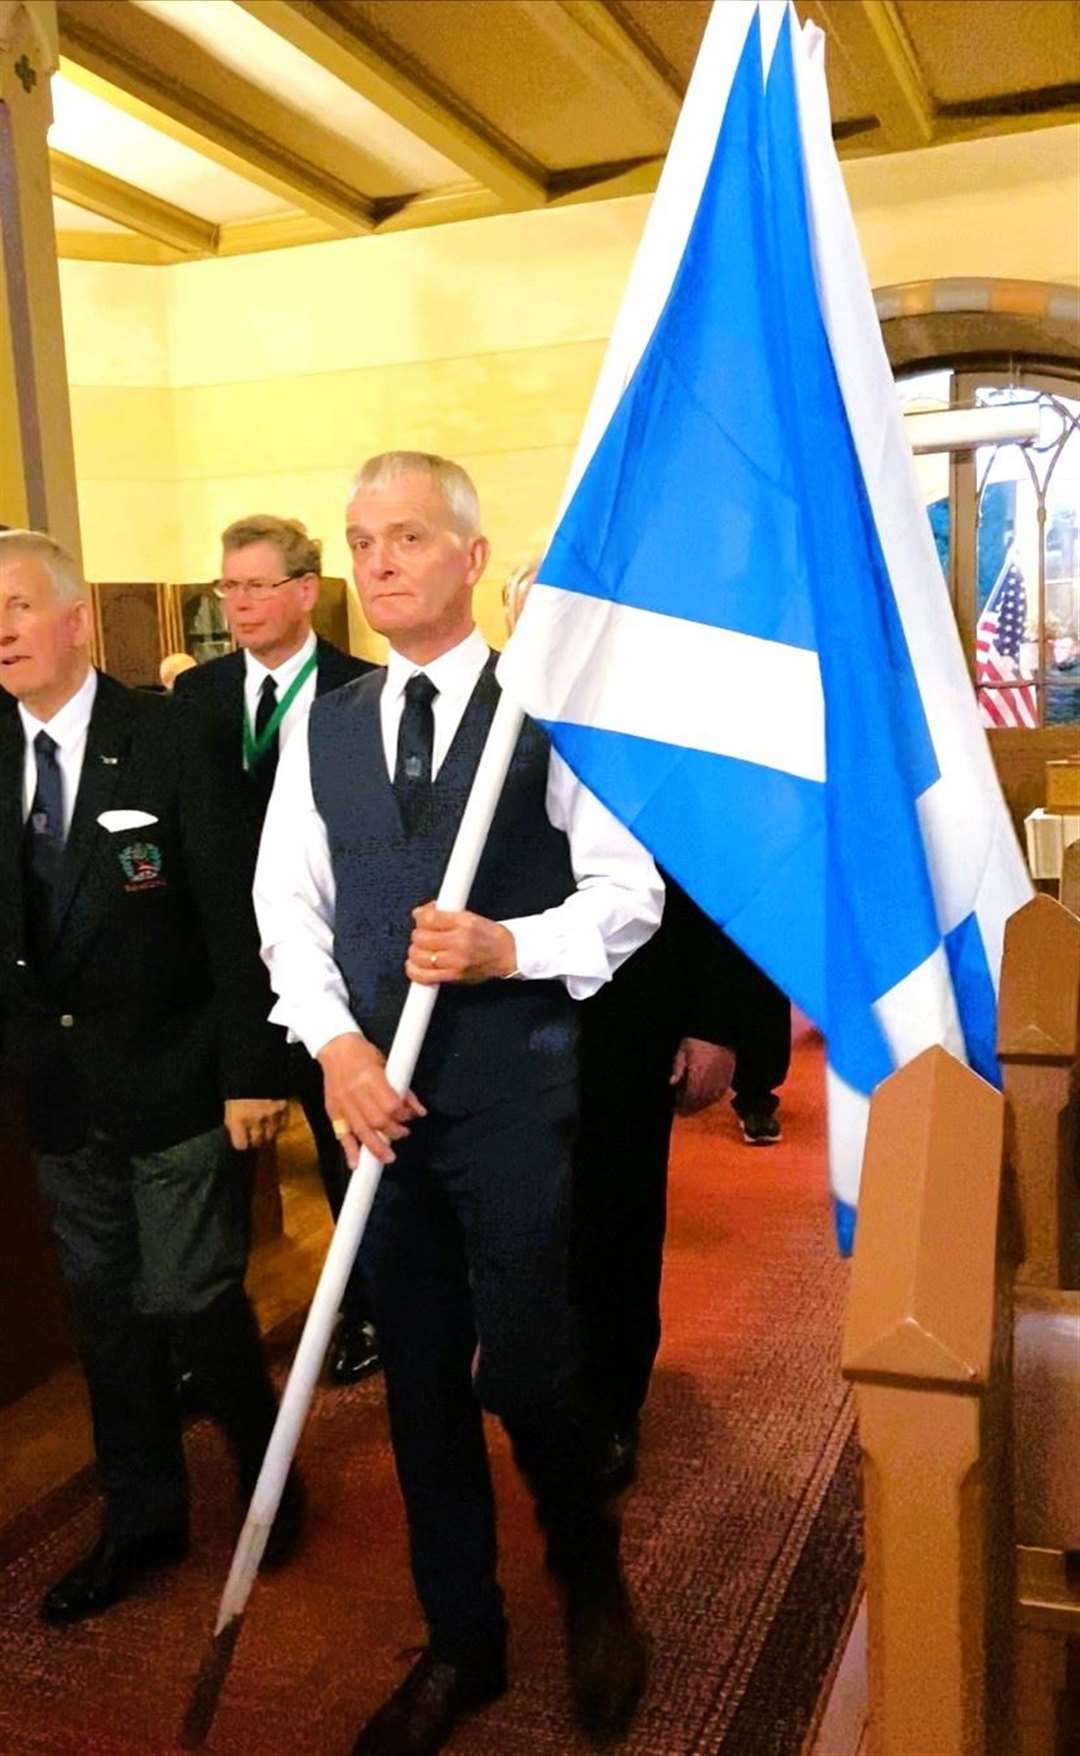 James was proud to represent Scotland at the blessing of the plough ceremony.